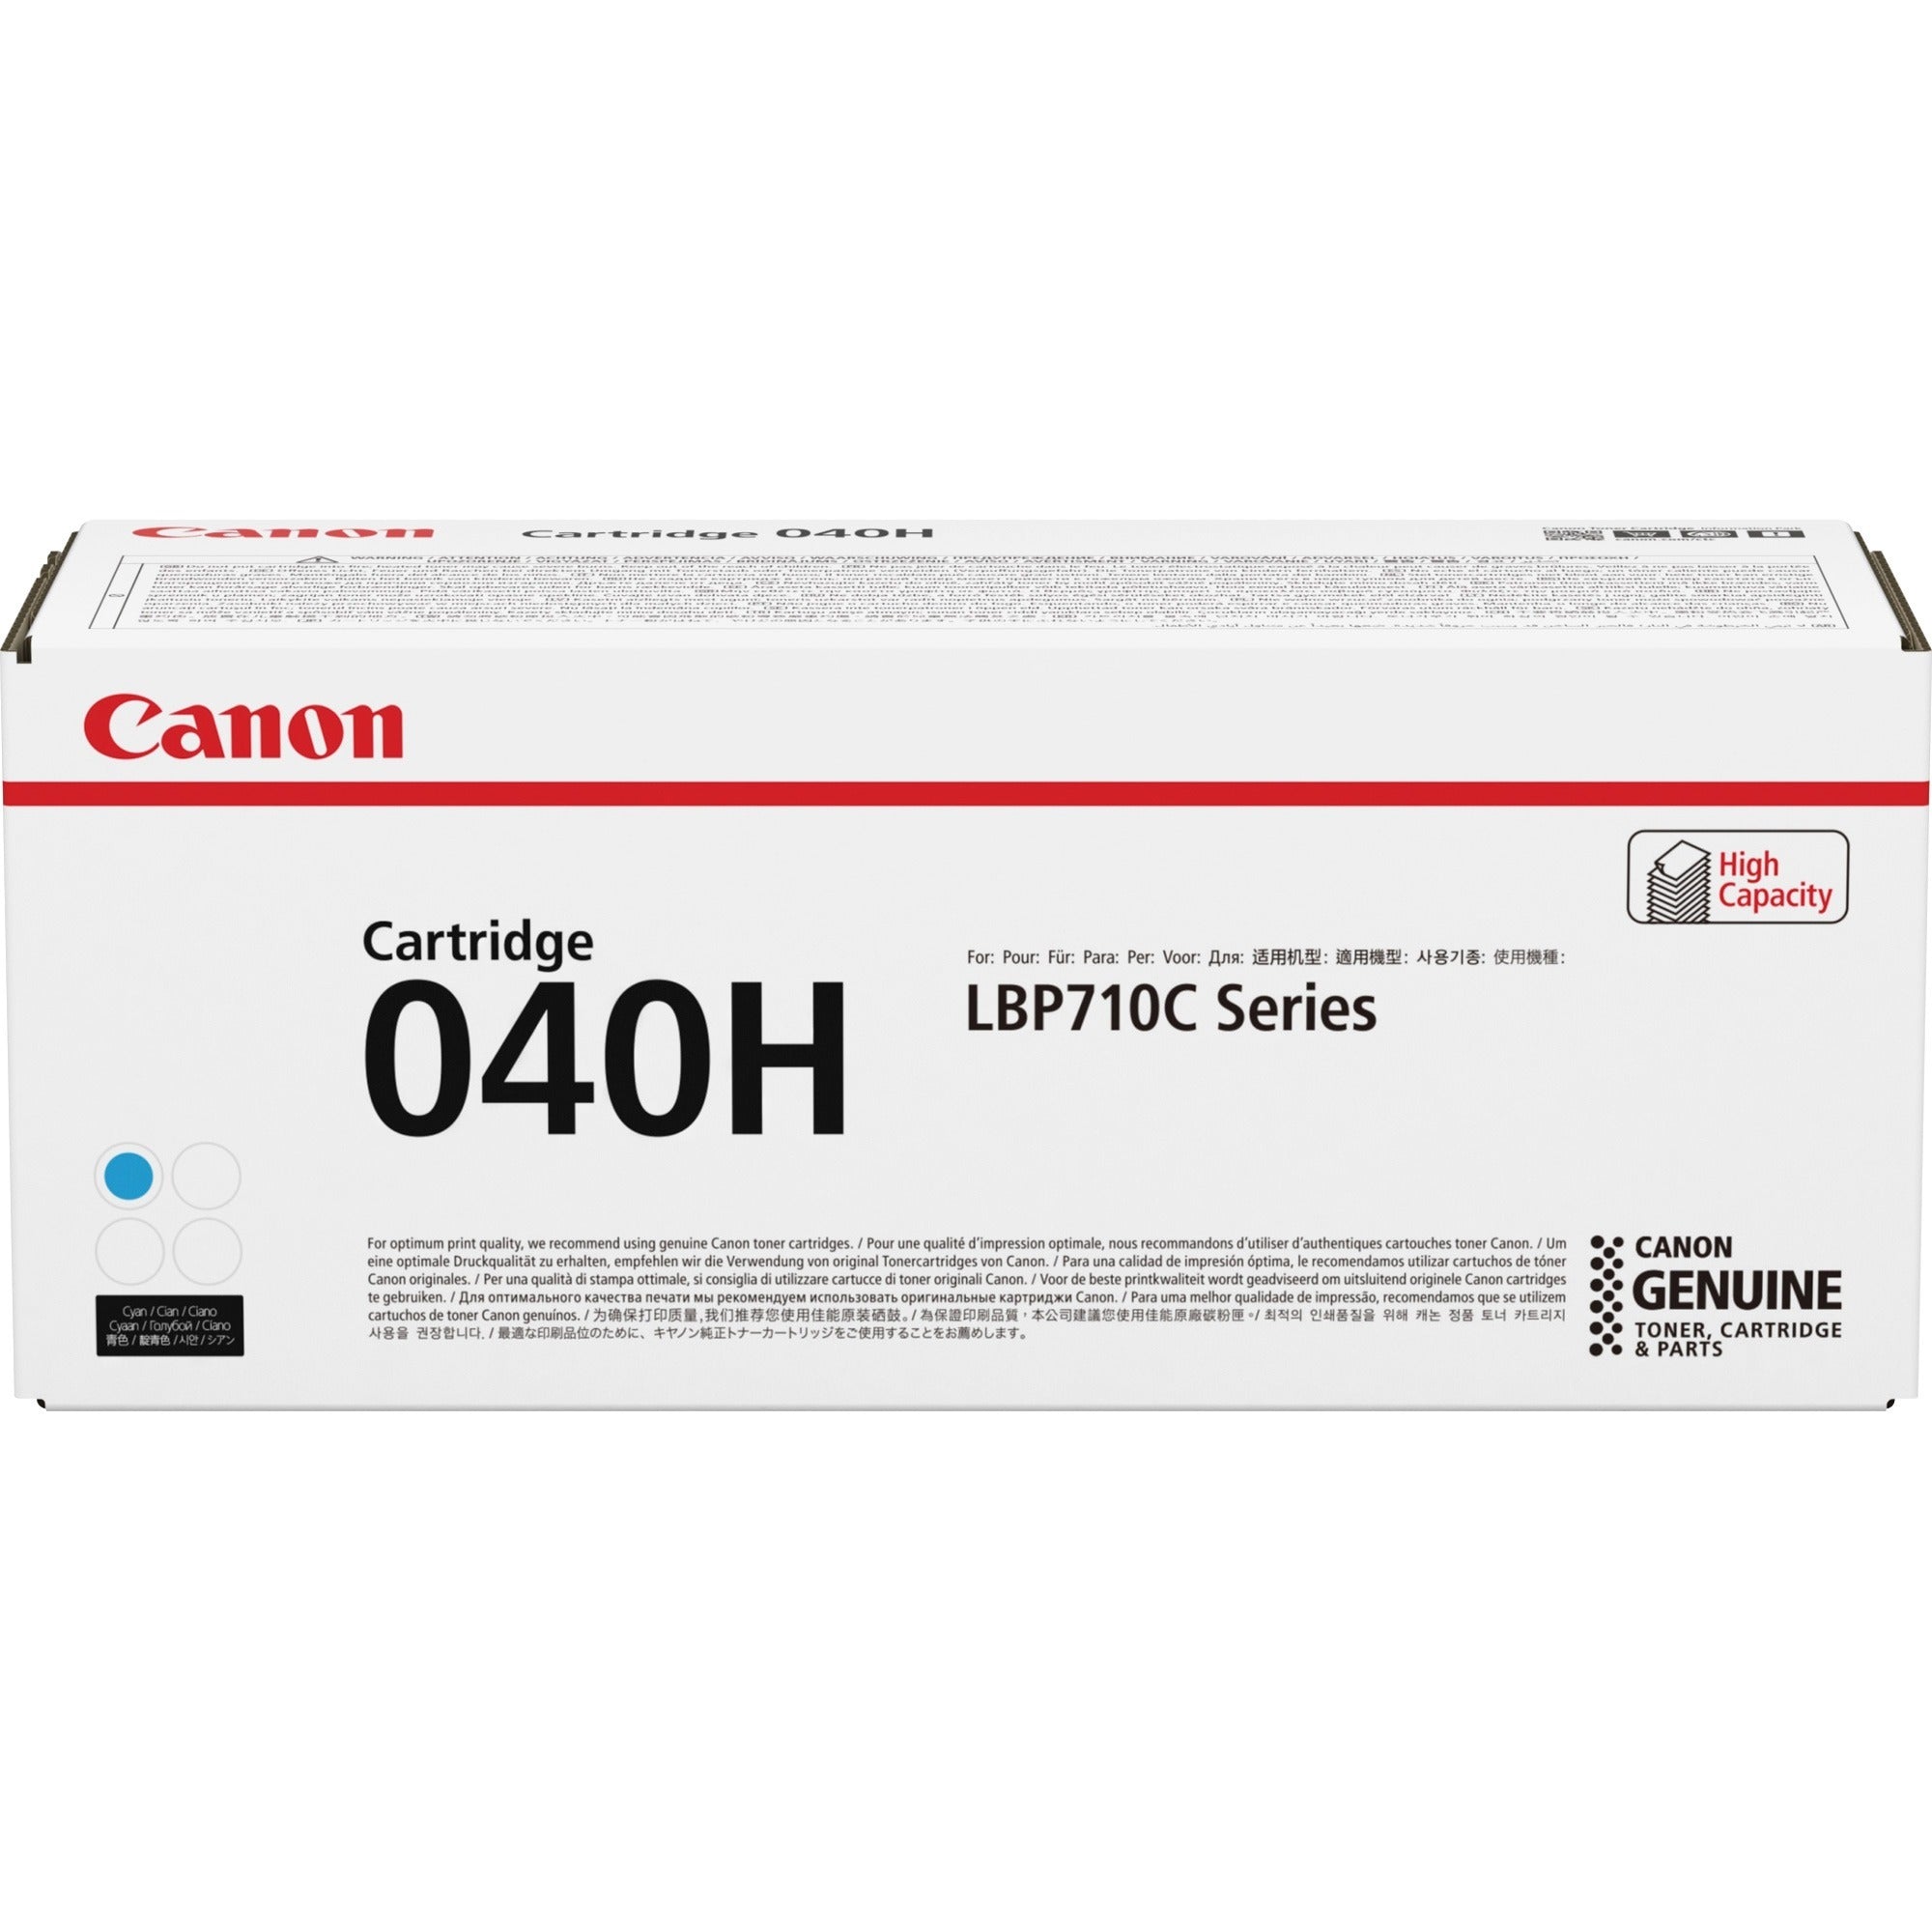 canon-toner-cartridge-laser-high-yield-10000-pages-cyan-1-each_cnmcrtdg040hc - 1